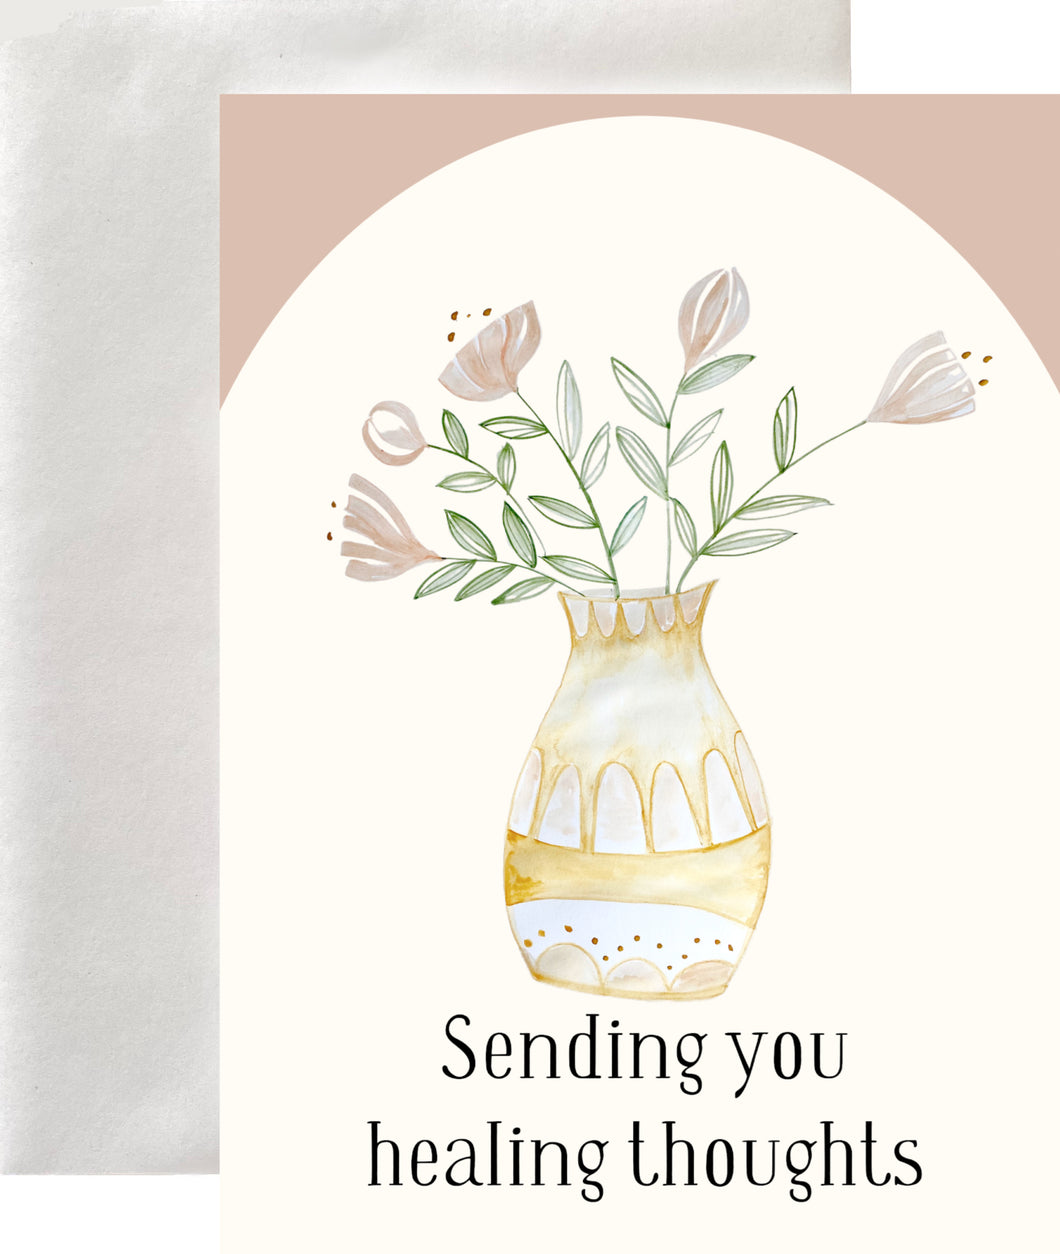 Sending You Healing Thoughts Greeting Card Blank Interior